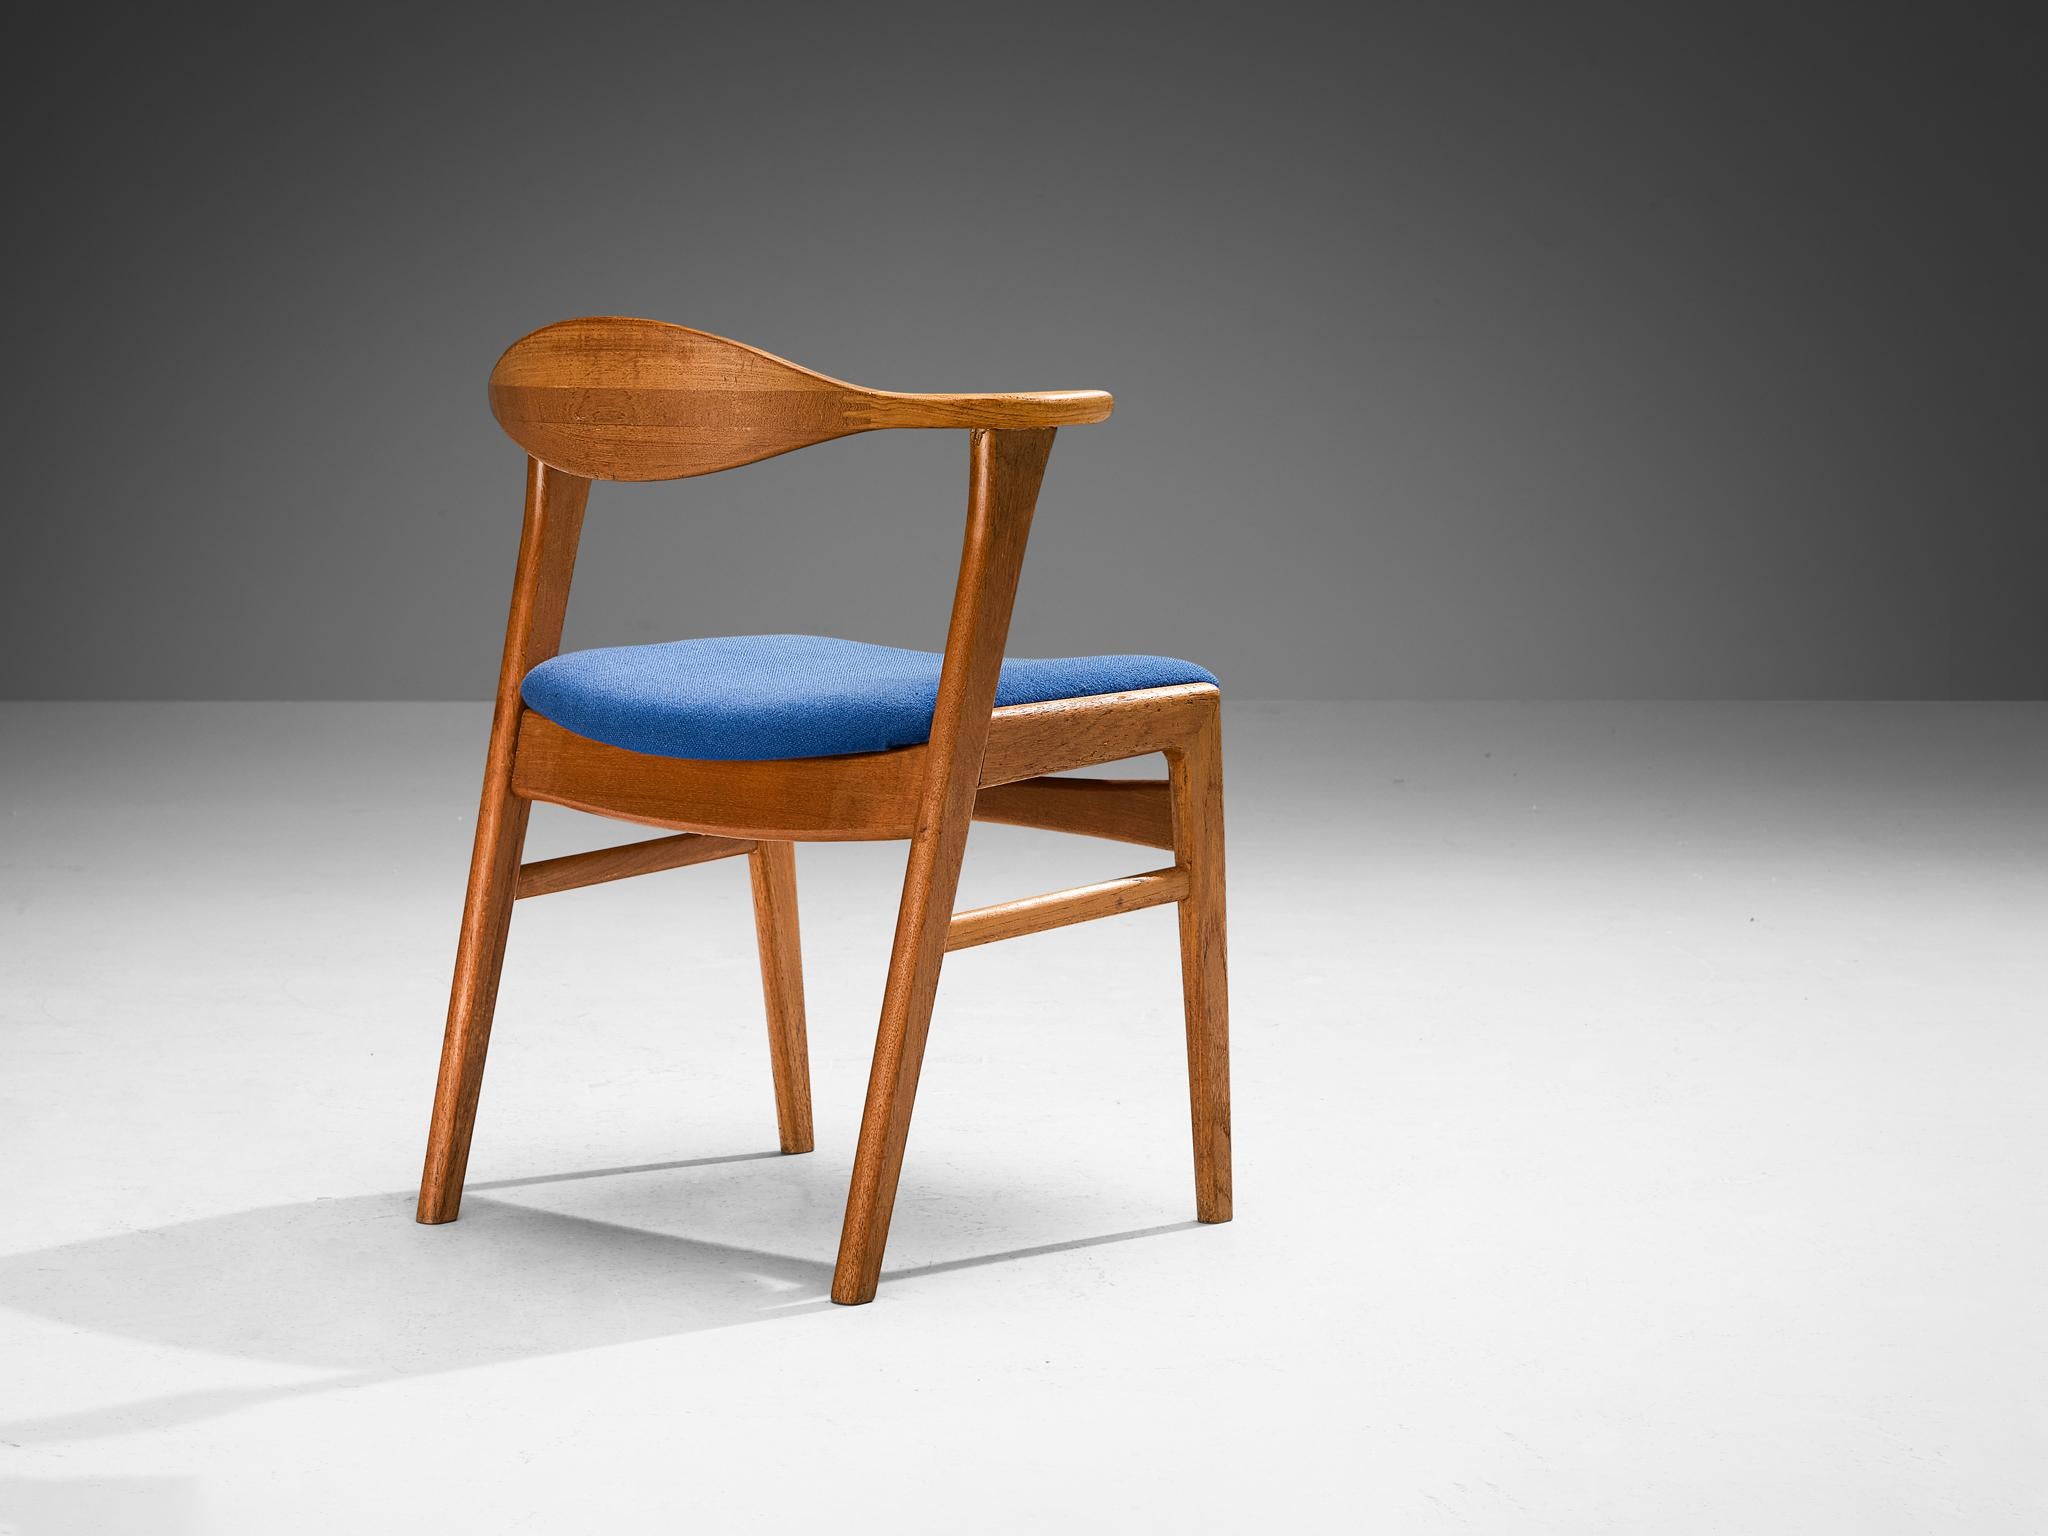 Erik Kirkegaard for Høng Stolefabrik, armchair, model 49b, fabric, oak, Denmark, 1960s

This bullhorn-shaped dining chair provides an ergonomic seating experience due to the curved backrest and wide seat. The profile features a dynamic construction